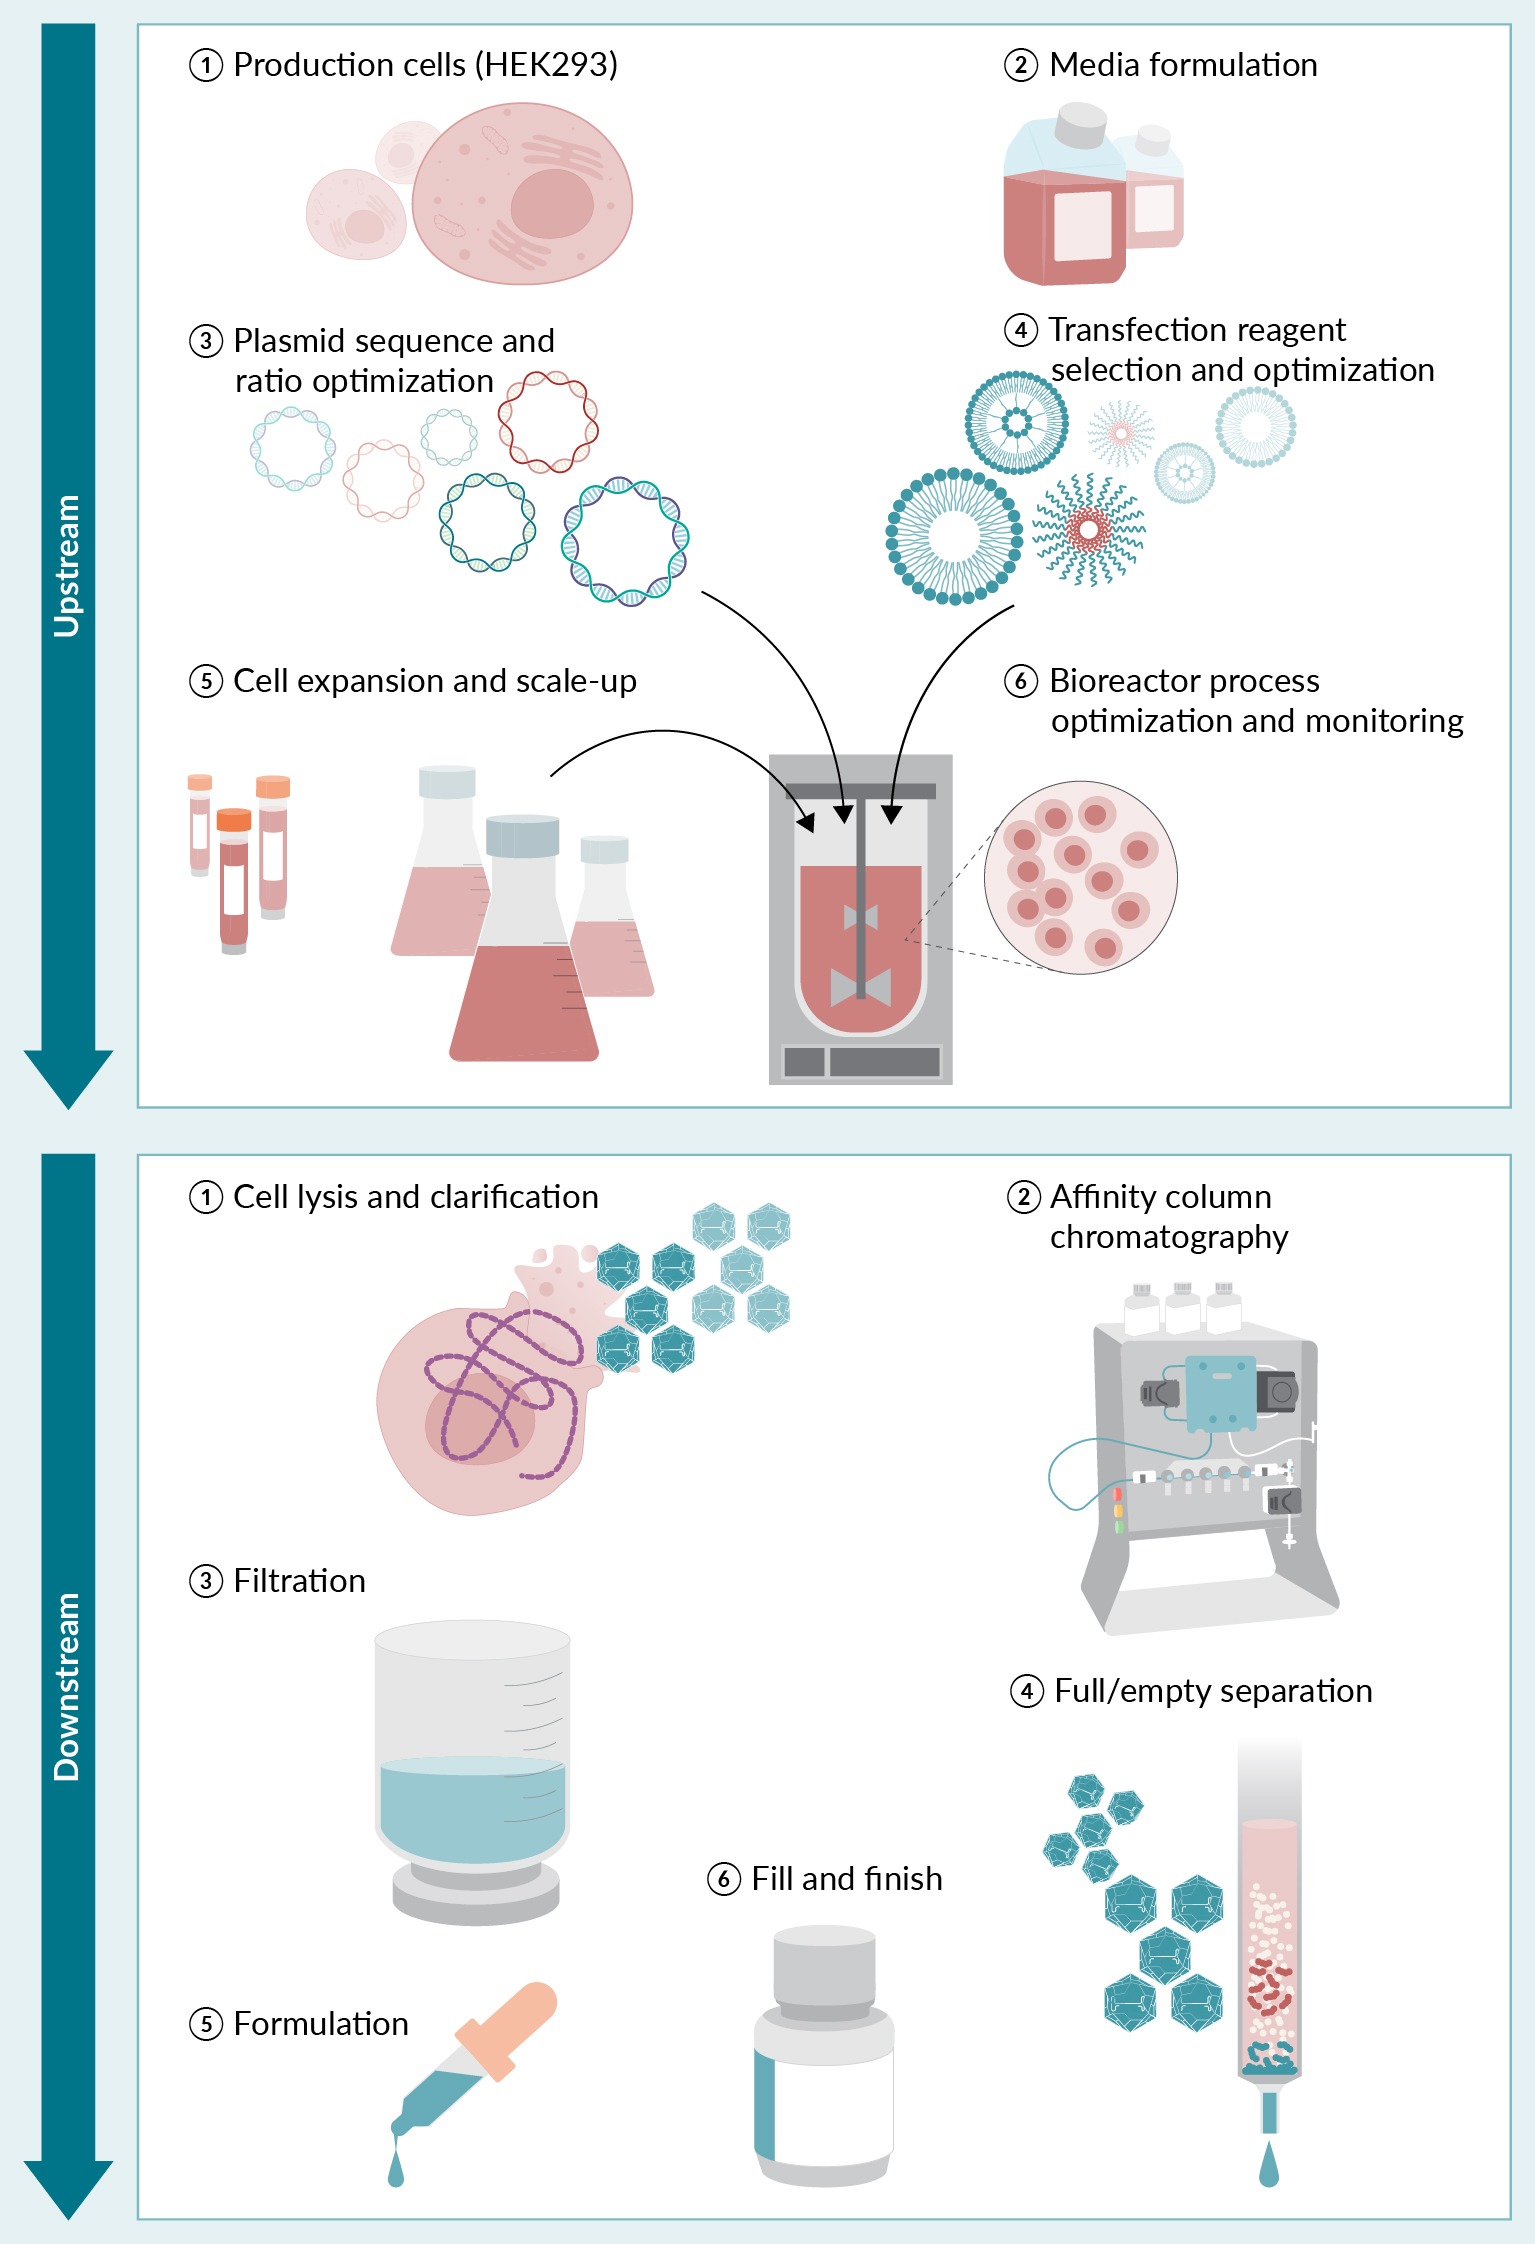 Upstream activities include cell-line selection, media formulation, plasmid sequence and ratio optimization, transfection reagent selection and optimization, cell expansion and scale-up, and bioreactor process optimization and monitoring. Downstream activities include concentration of raw materials, cell lysis, nuclease treatment, purification, polishing, formulation, fill, and finish.